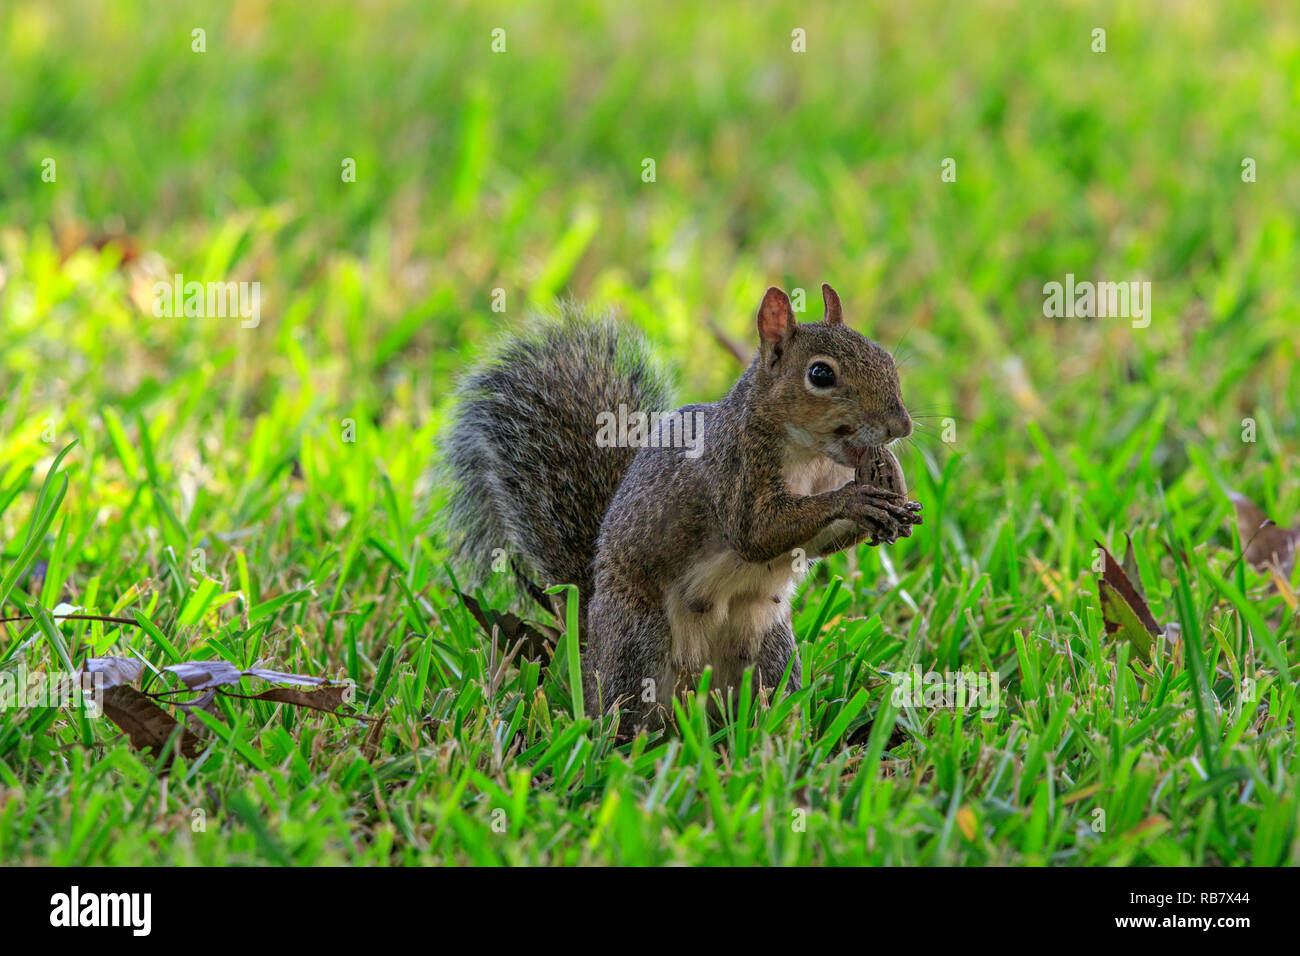 Eastern gray squirrel (Sciurus carolinensis) with nut as food, on green grass. Stock Photo